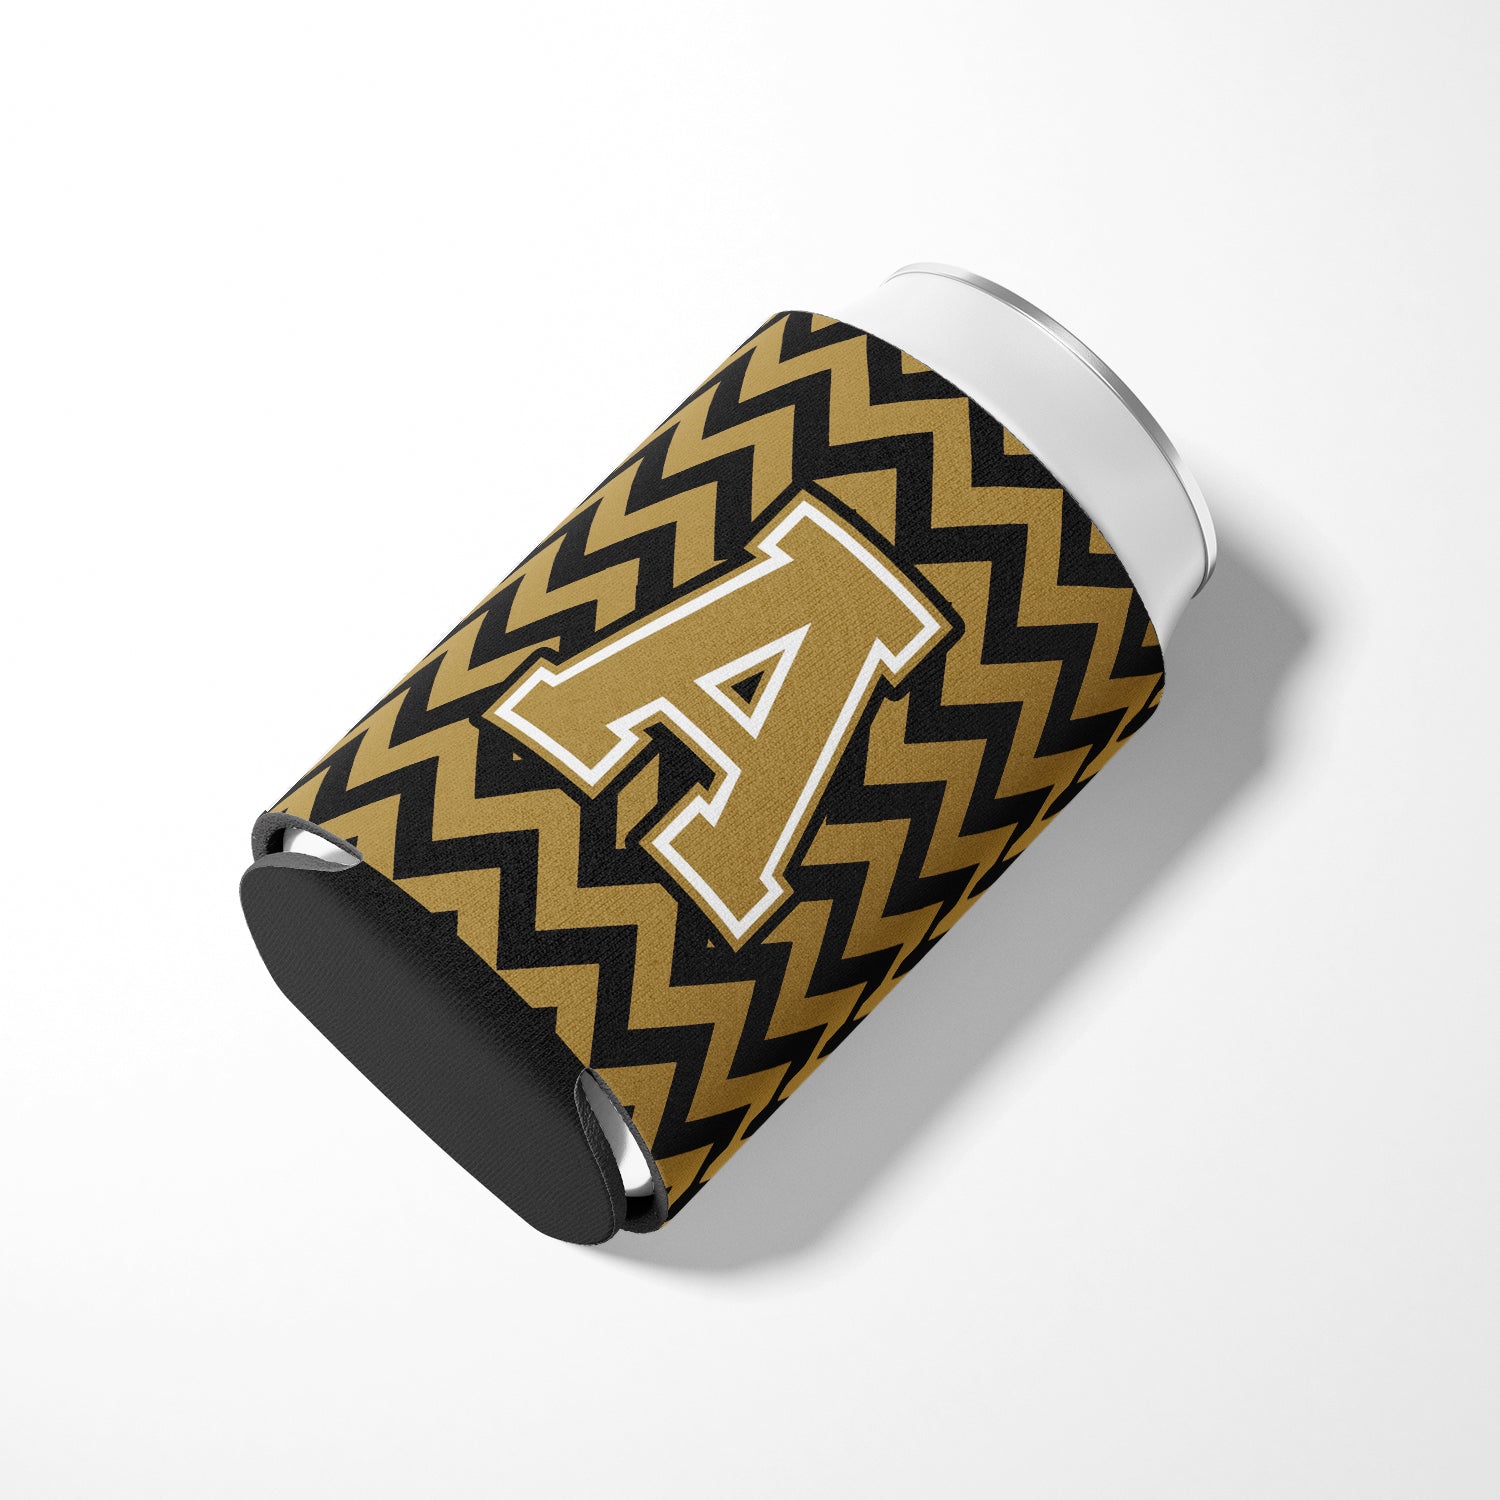 Letter A Chevron Black and Gold  Can or Bottle Hugger CJ1050-ACC.